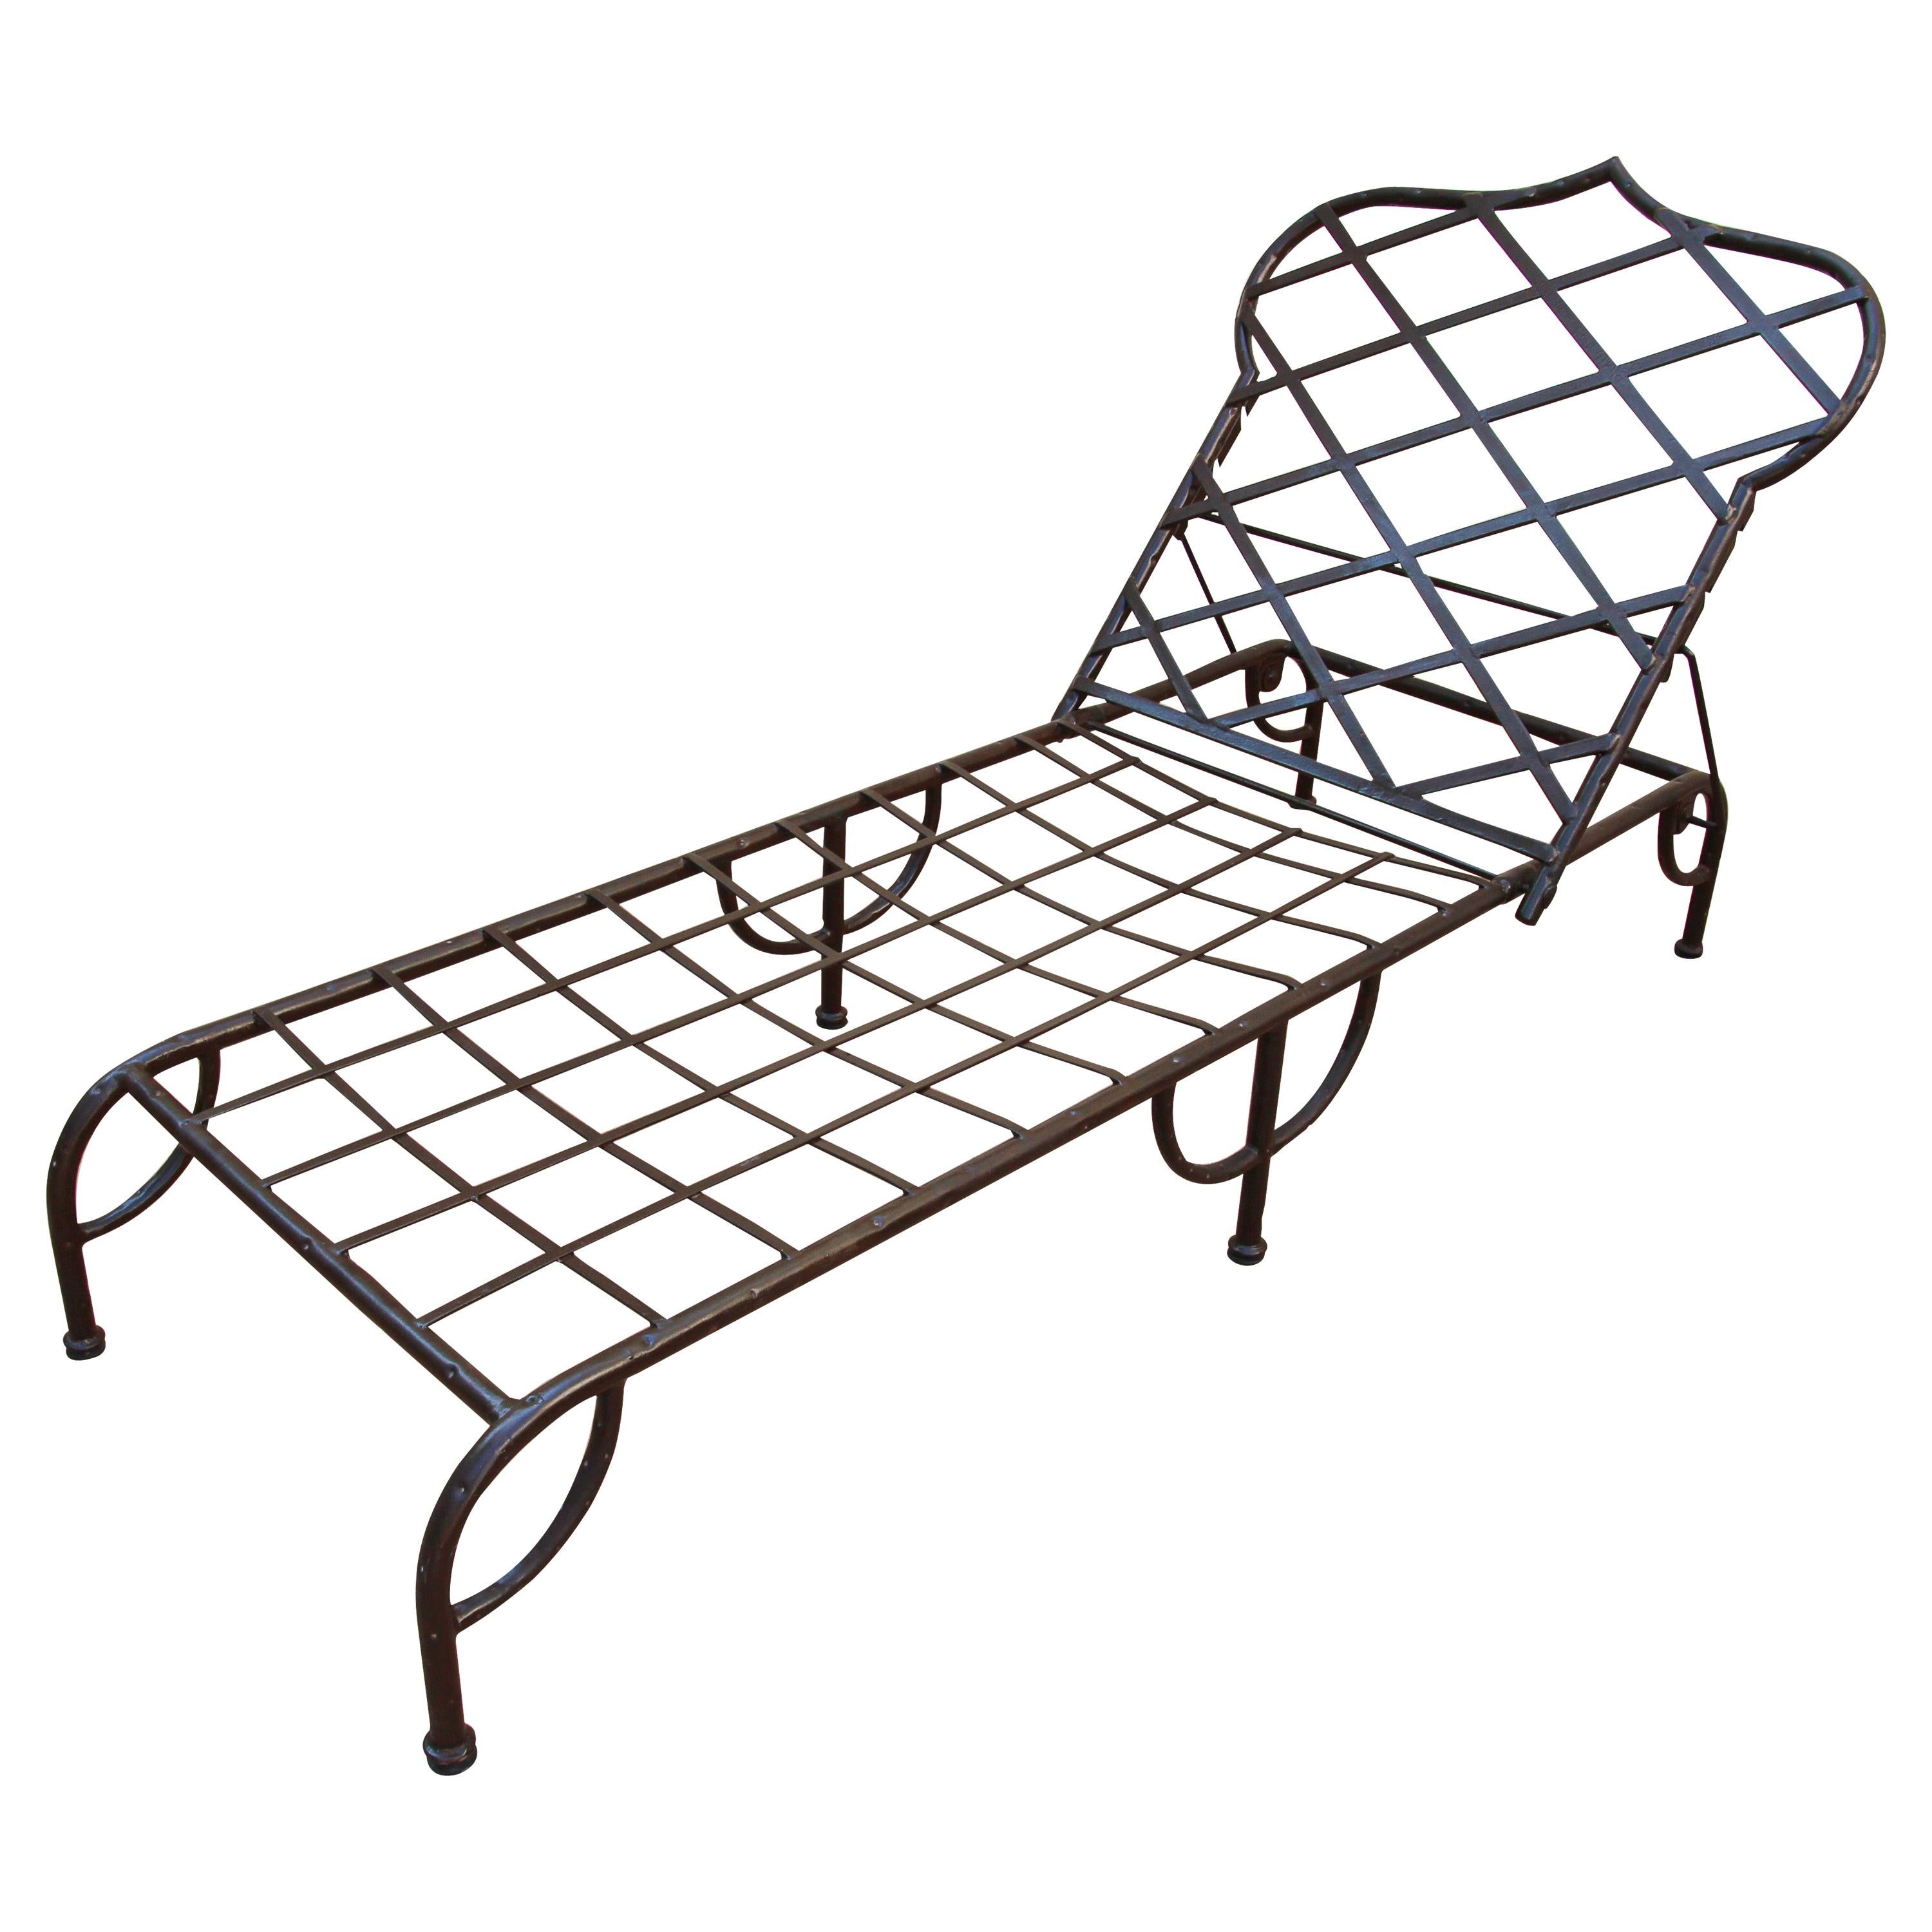 Outdoor Metal Lounge Chair in Mario Papperzini Style Moorish Backrest Design